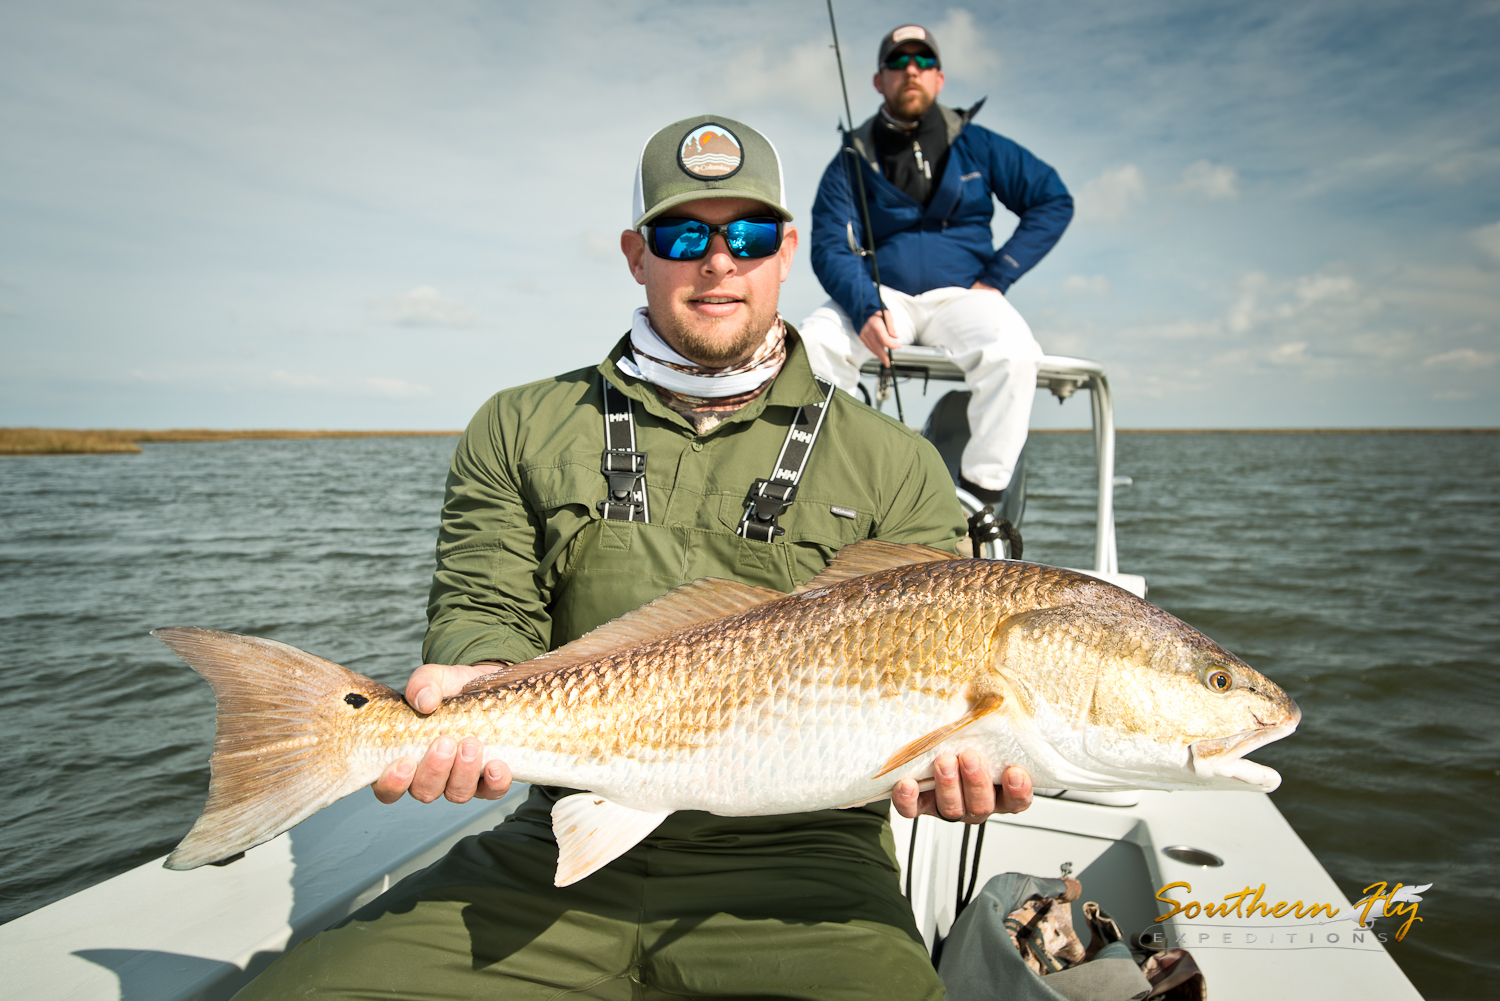 Fly fishing guides southern fly expeditions out of New Orleans Louisiana 